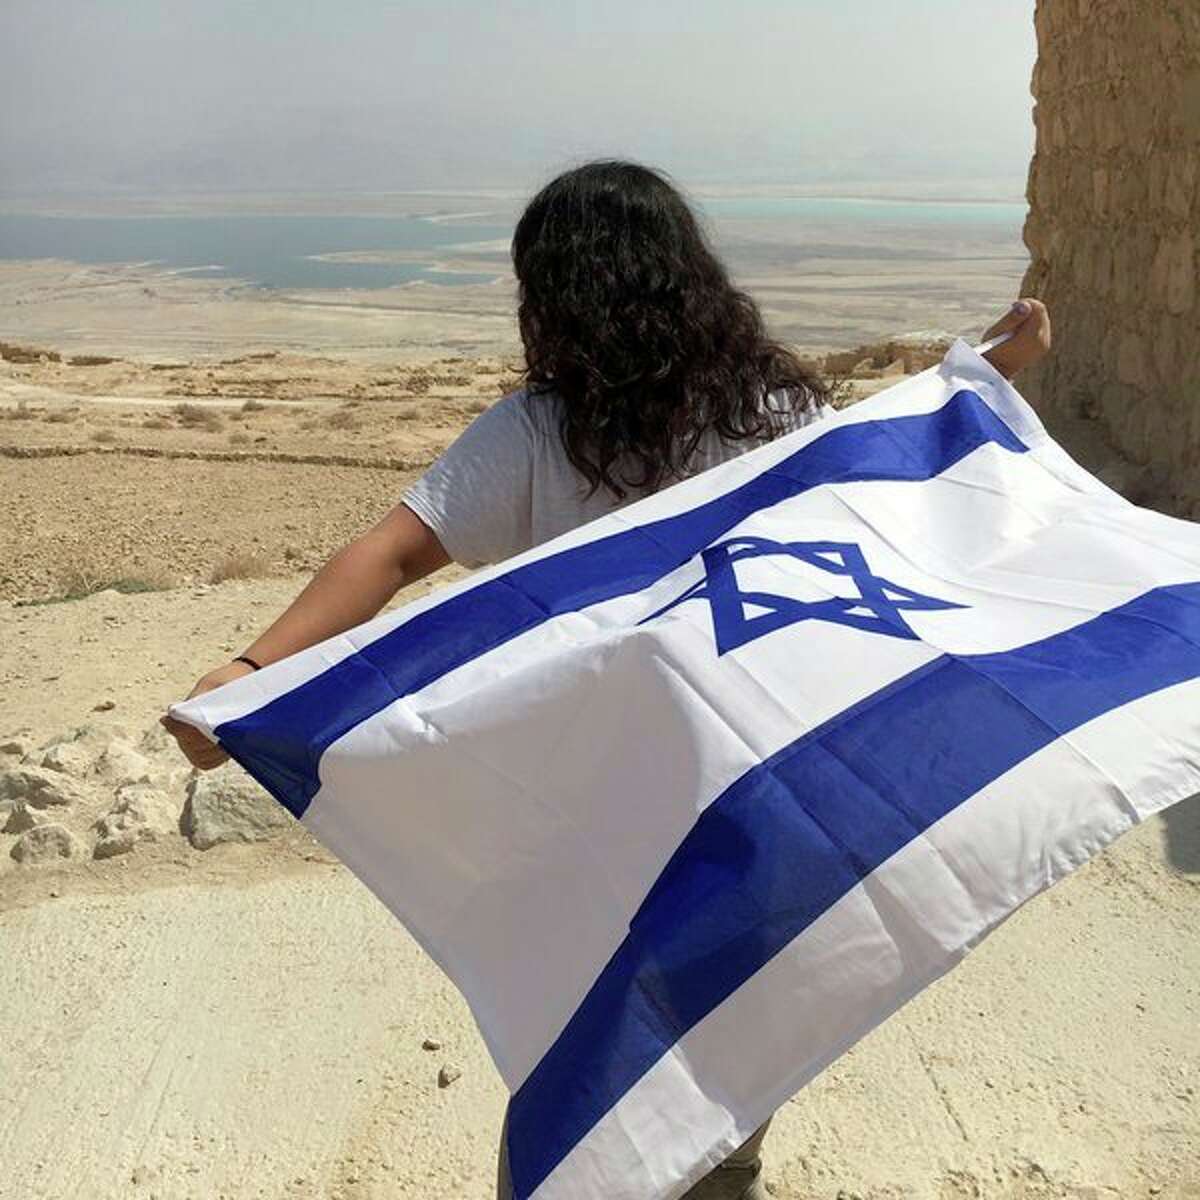 Rachel Kessler, 17, holds the Jerusalem flag while looking out toward the open land in Israel. (Submitted Photo)